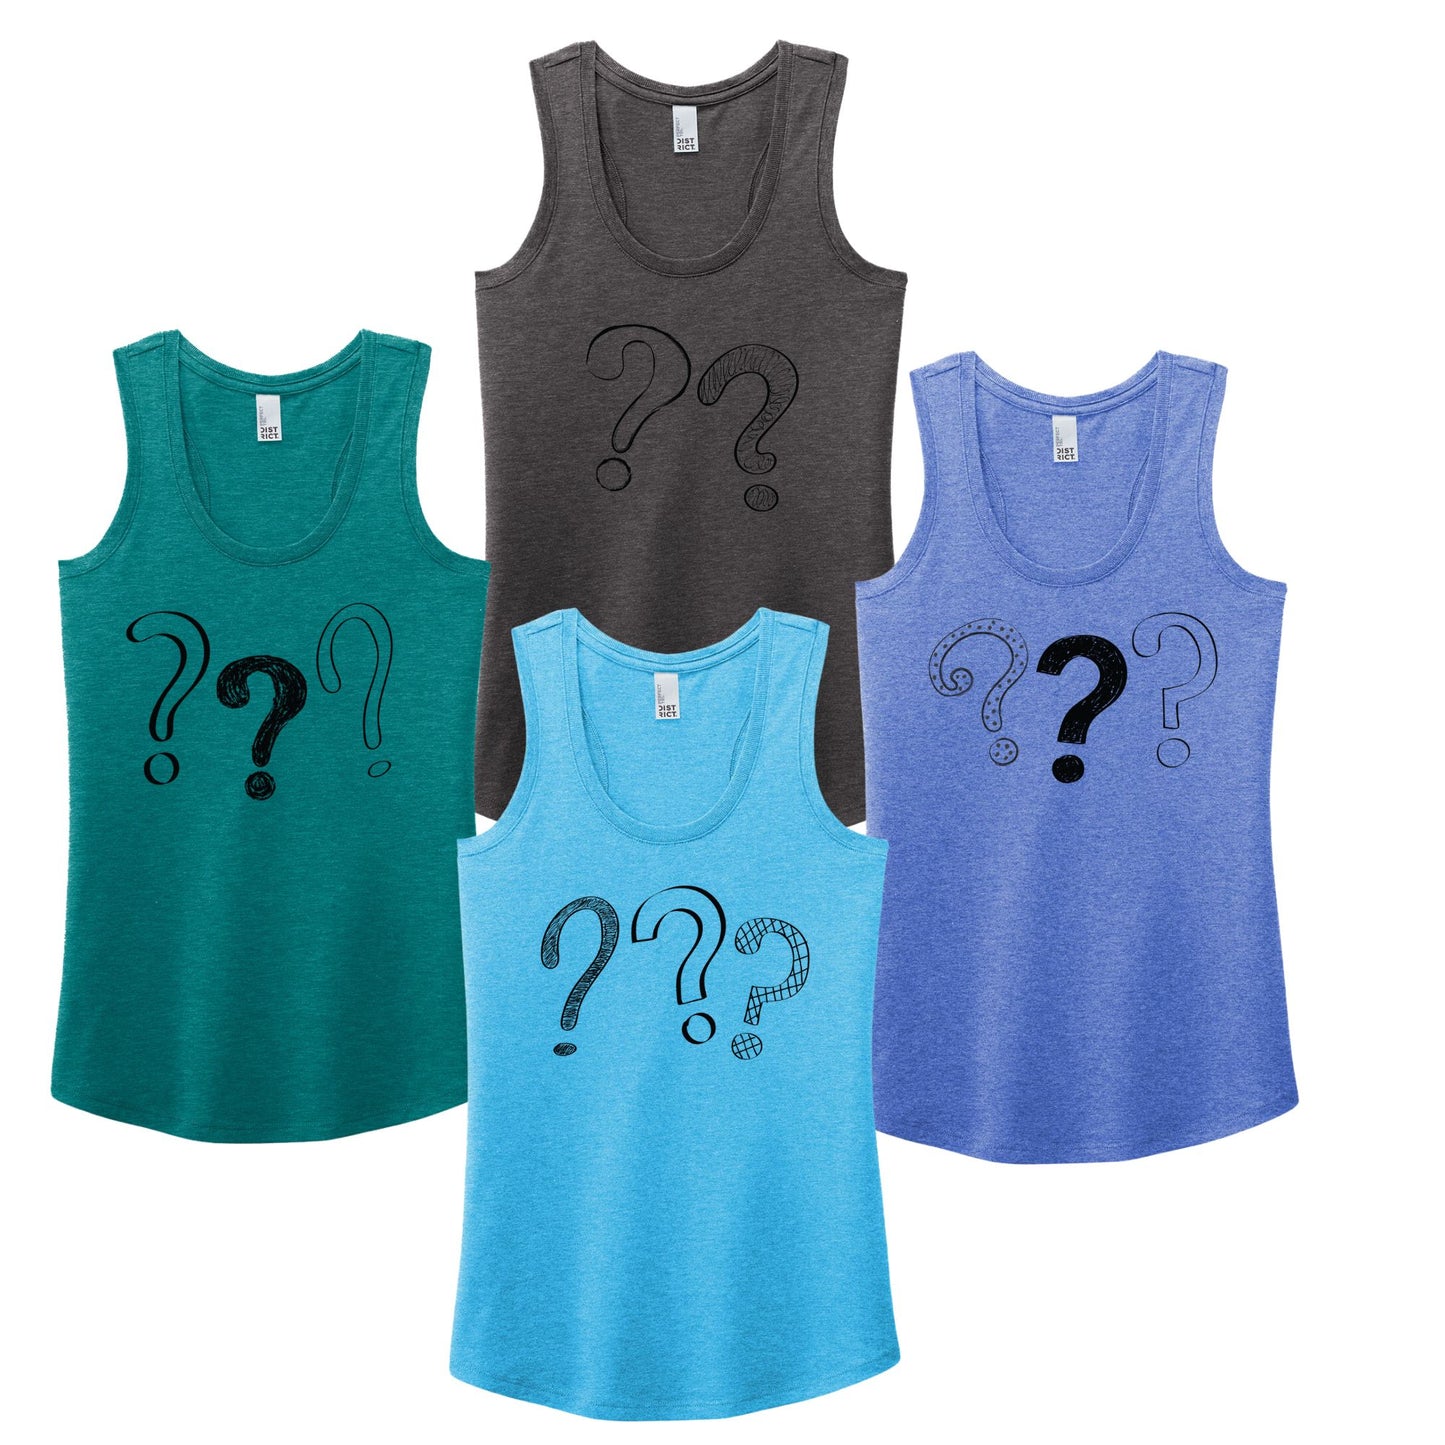 Nate's Mystery Tank Top